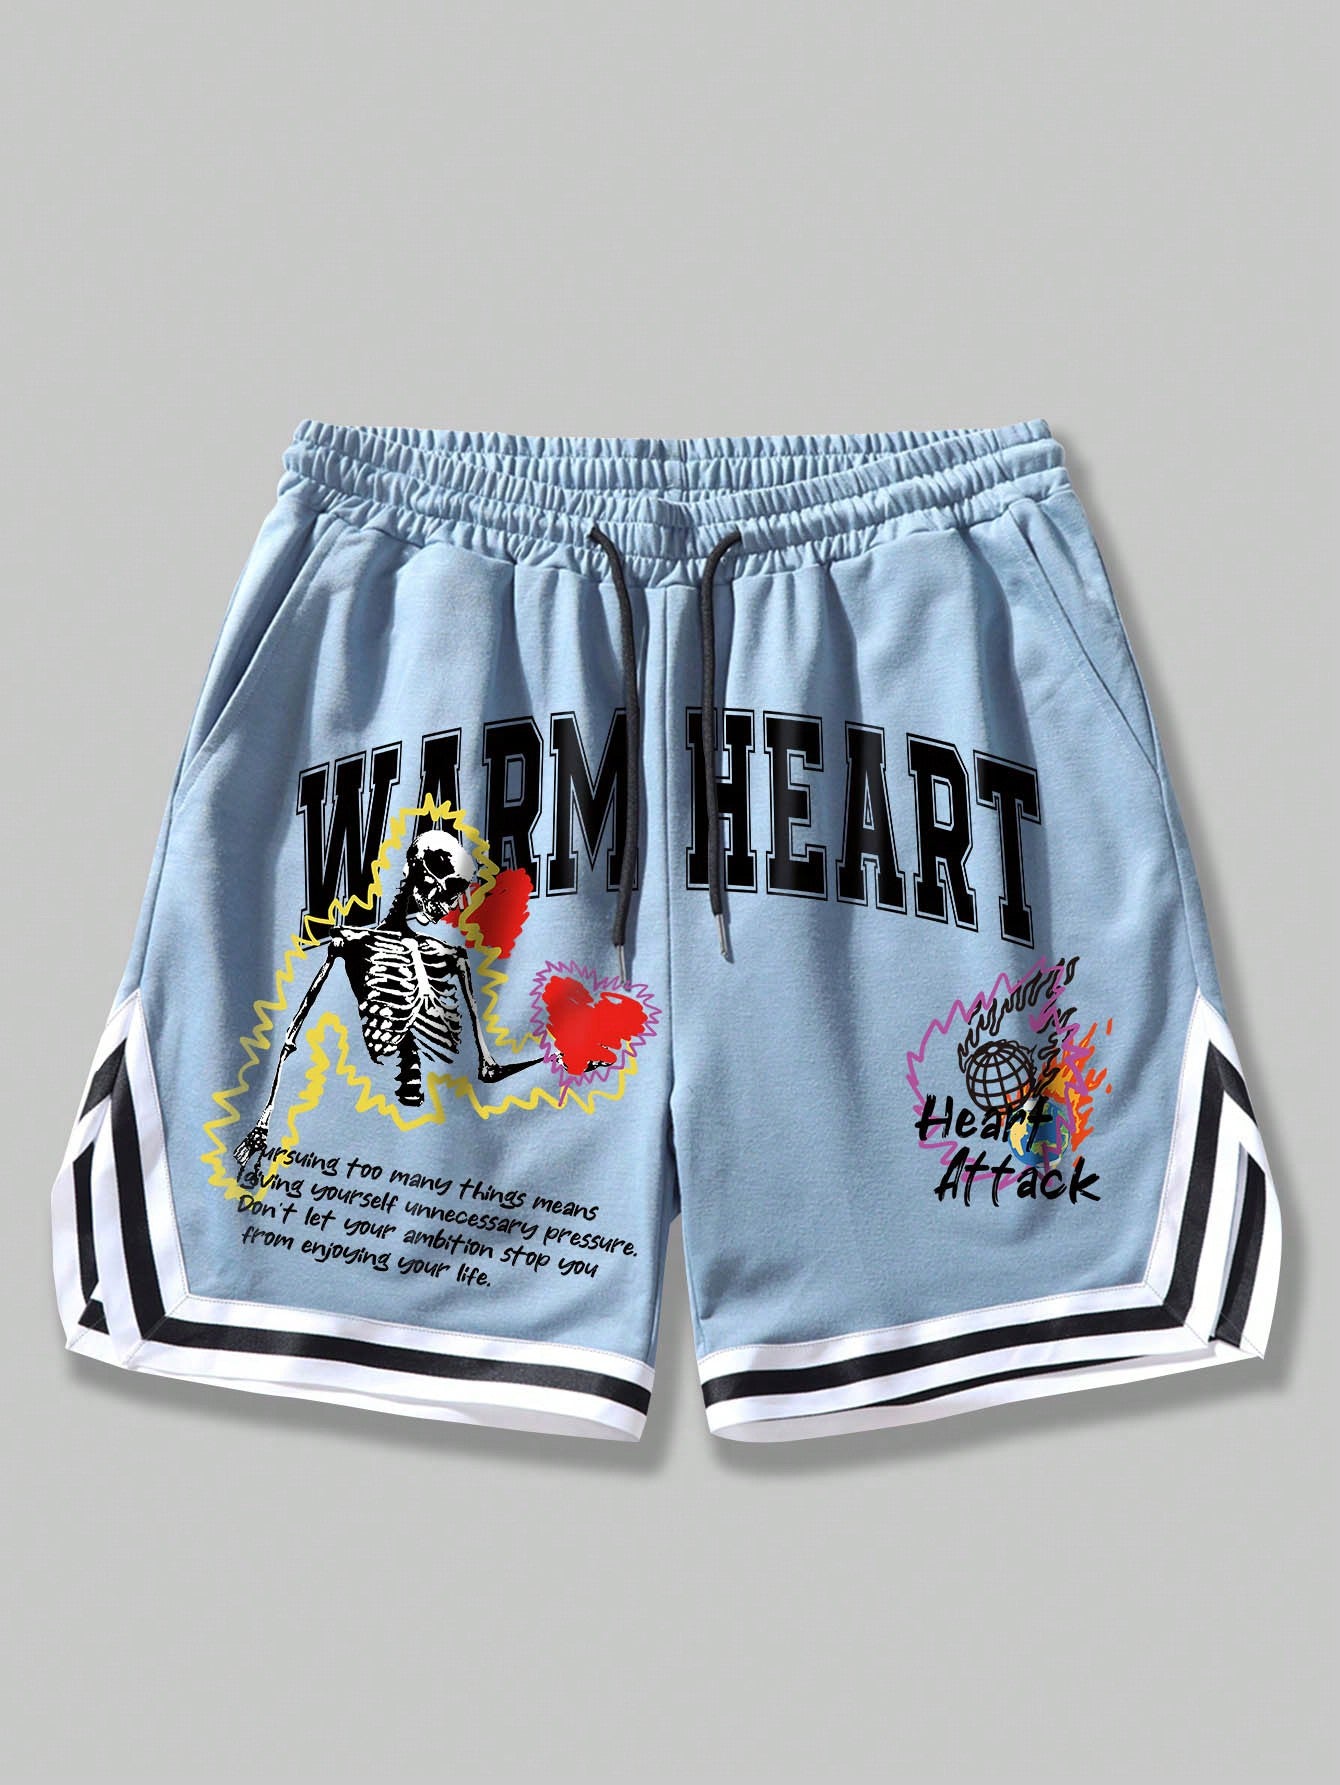 Men's Slogan Printed Basketball Shorts, Suitable For Daily Wear In Spring/Summer